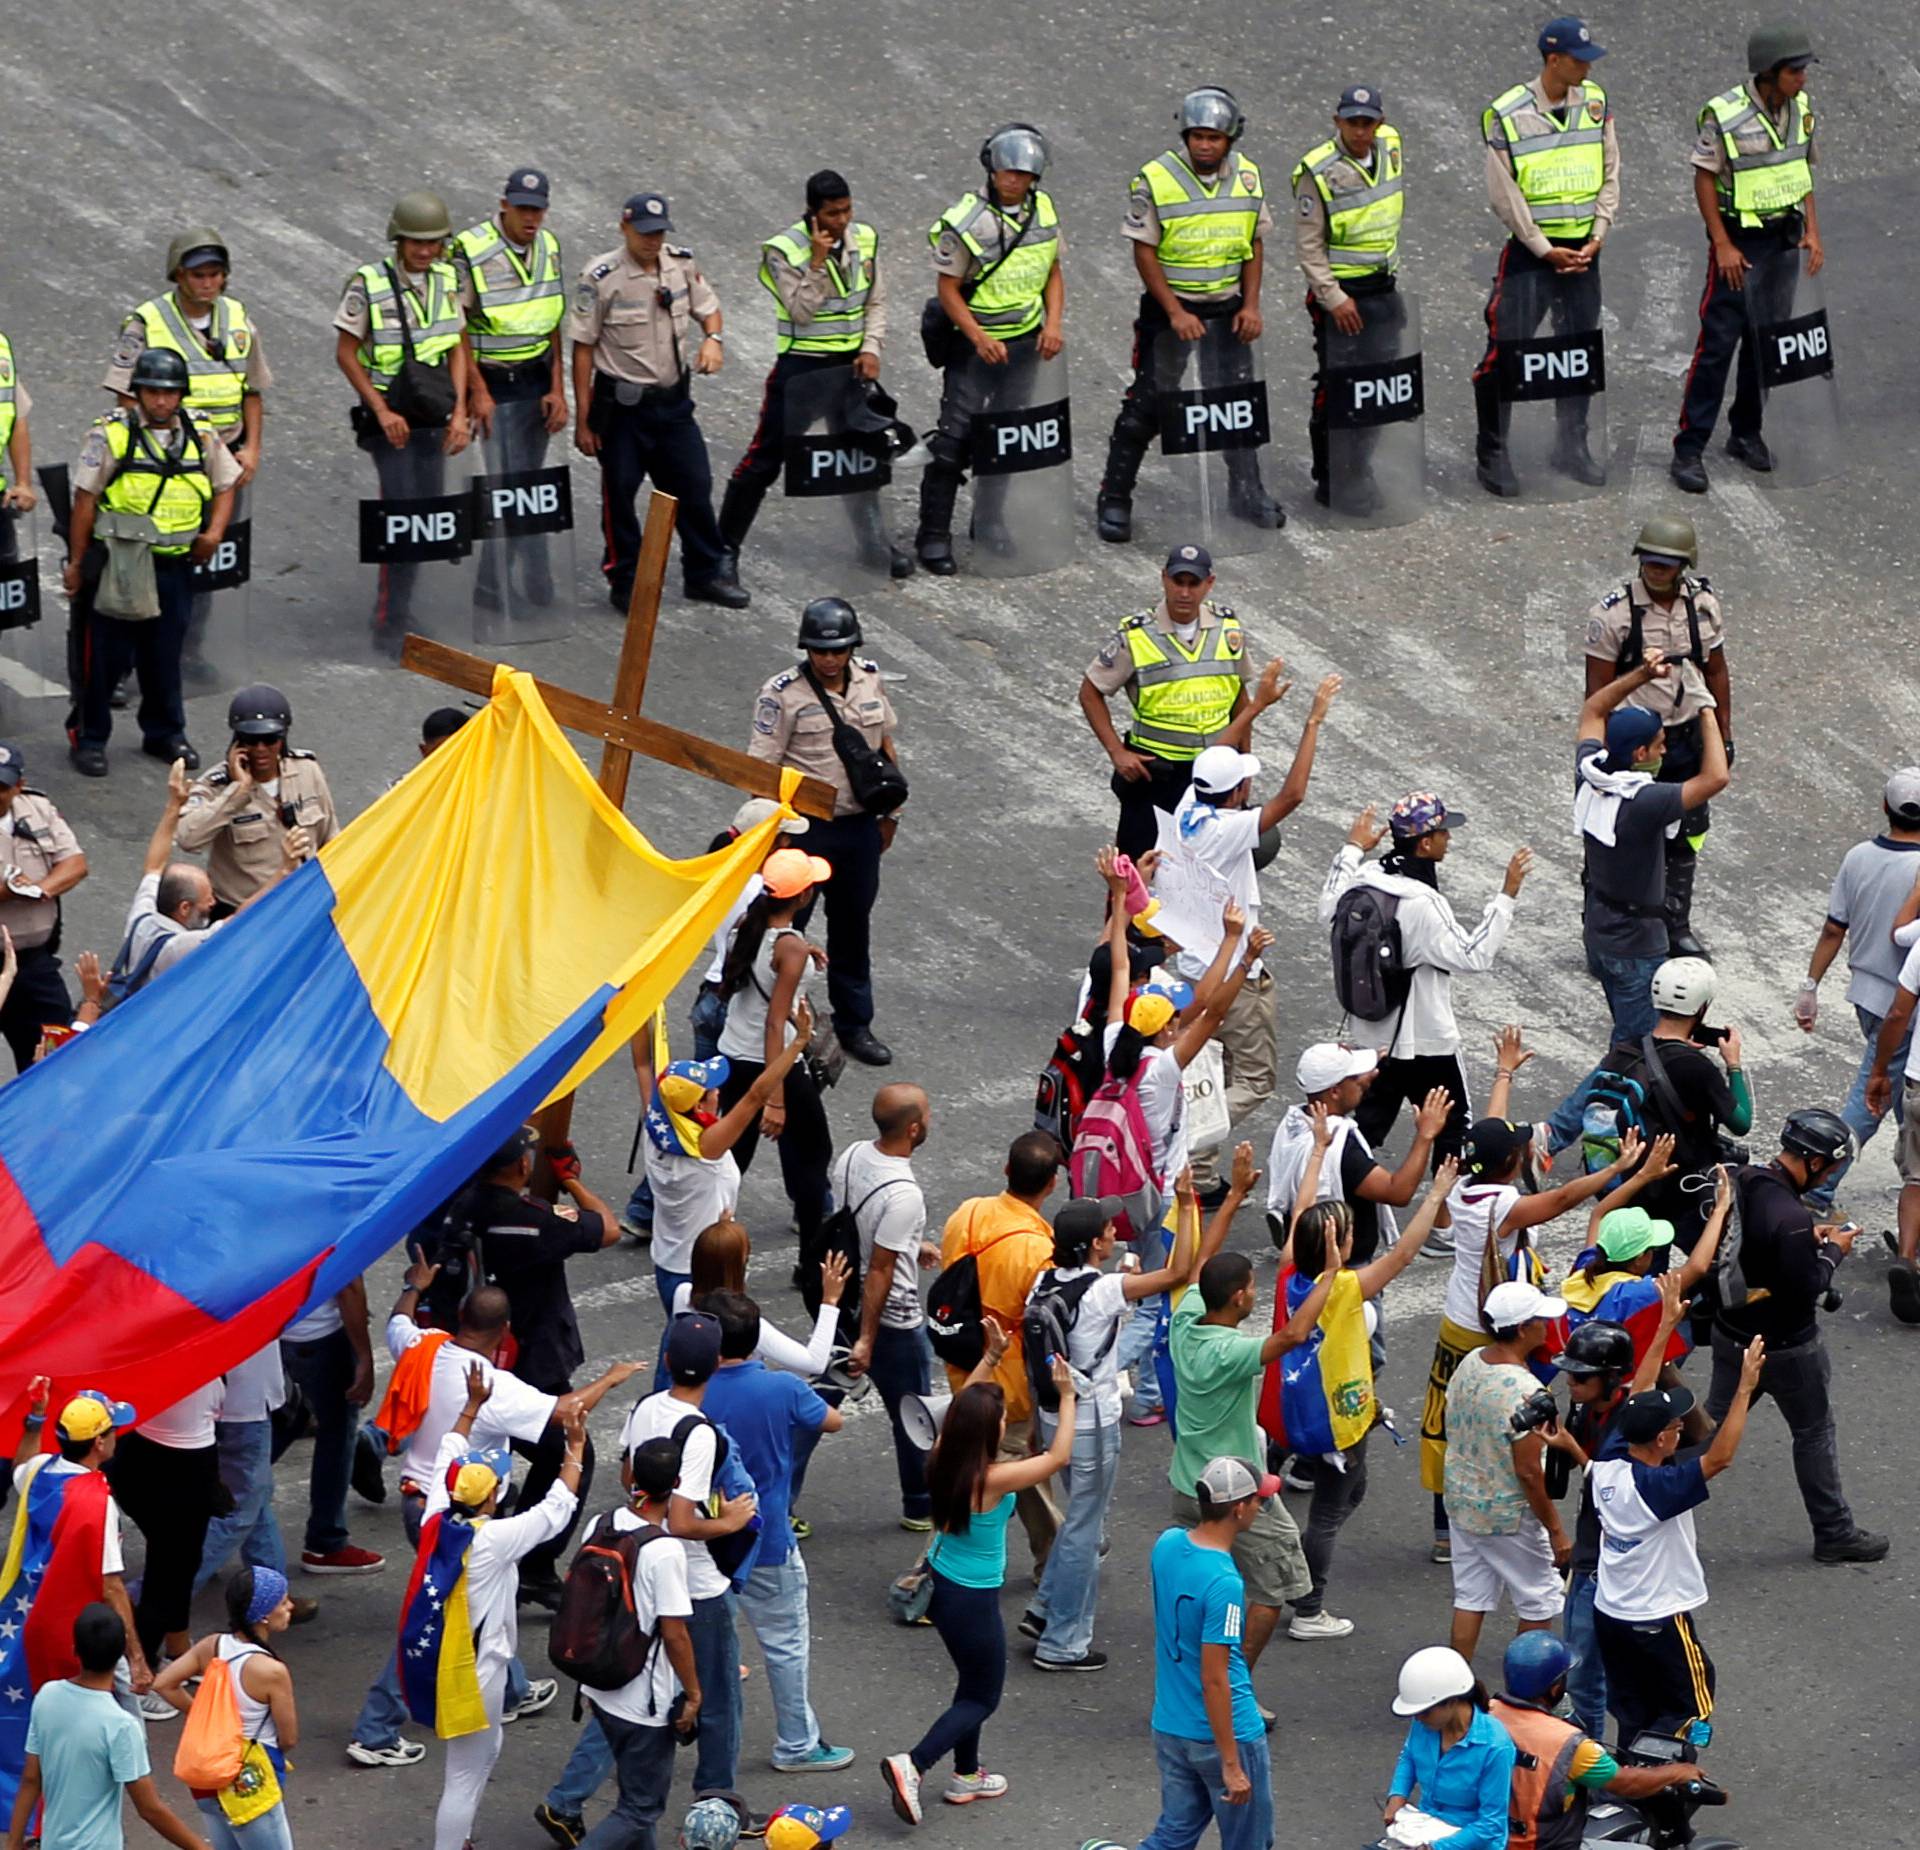 Demonstrators hold a cross as they take part in a rally to honour victims of violence during a protest against Venezuela's President Nicolas Maduro's government in Caracas